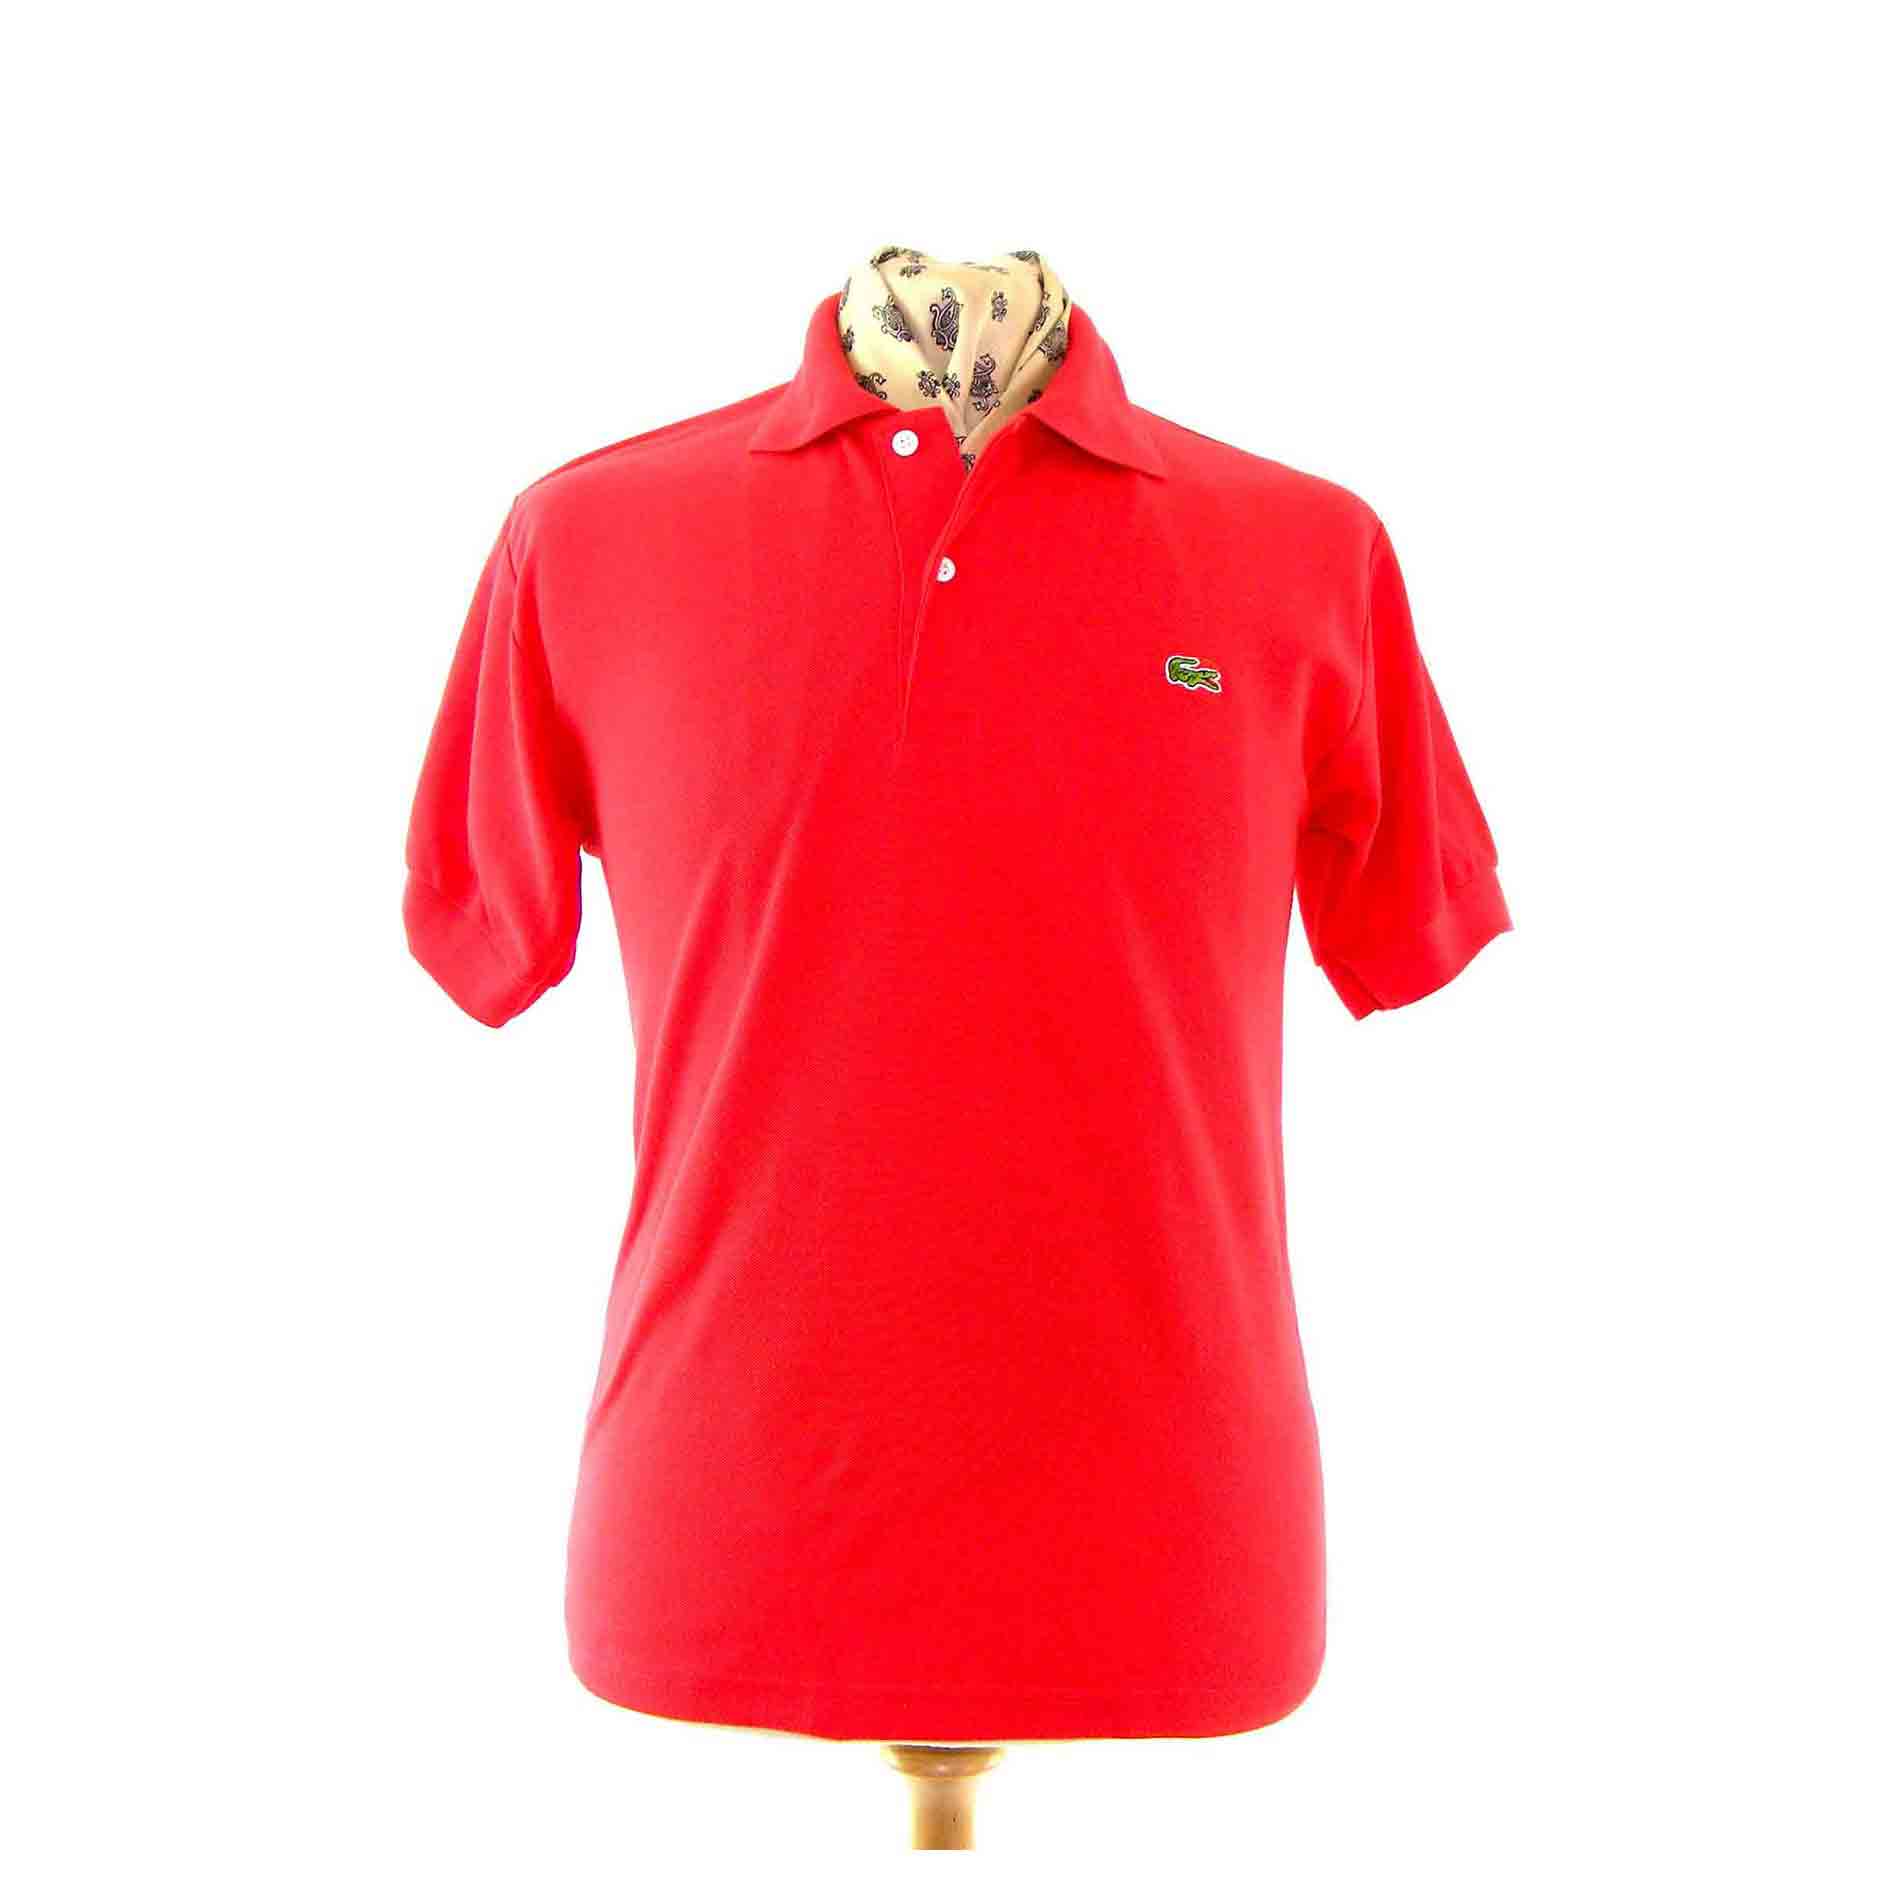 Cadmium Red Lacoste polo shirt - Blue 17 Vintage Clothing